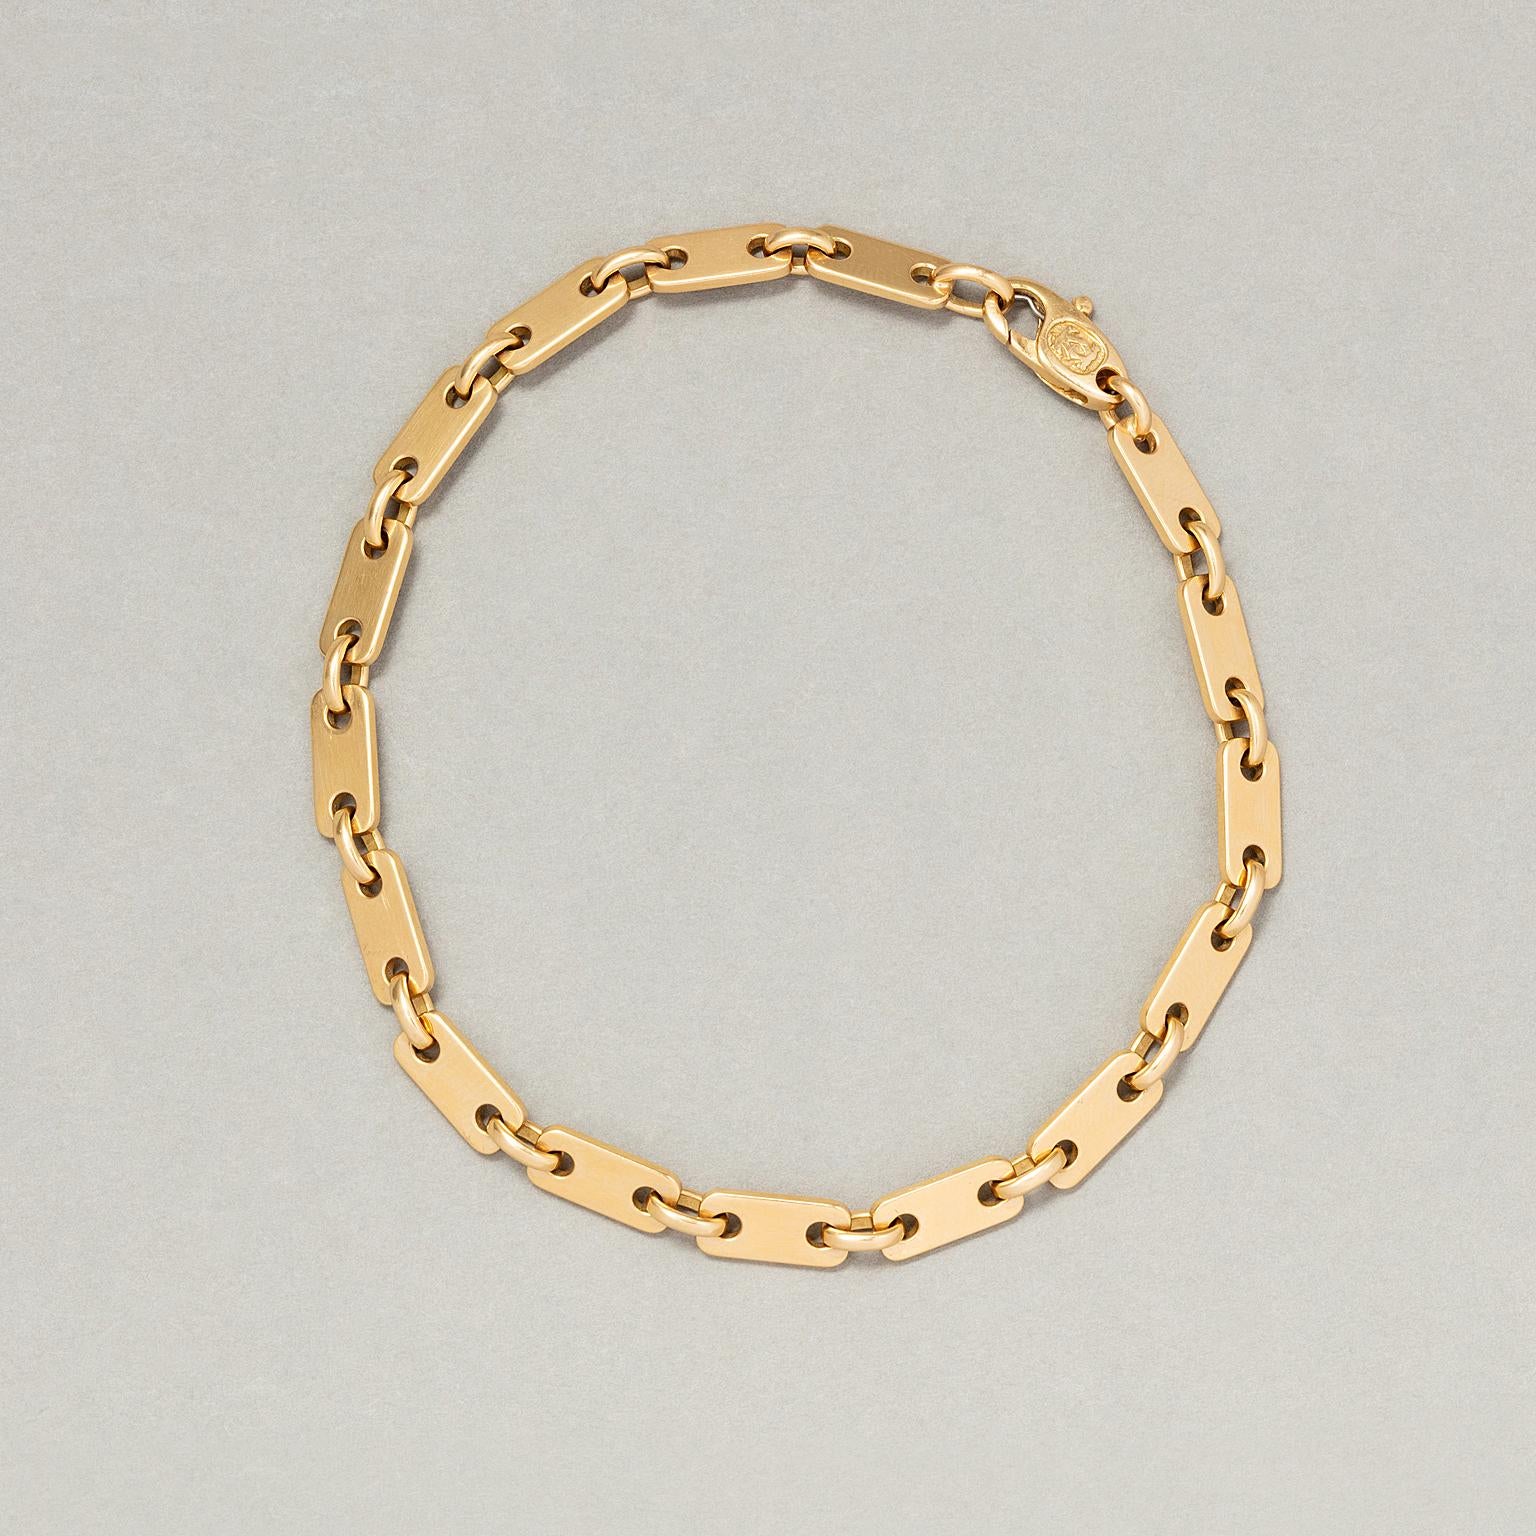 An 18 carat yellow gold tab link bracelet, each tab link is alternated with an oval link. The bracelet is closed with a carabiner clasp signed and numbered: Cartier, 750, DN 0820.
weight: 19 grams
length: 22 cm